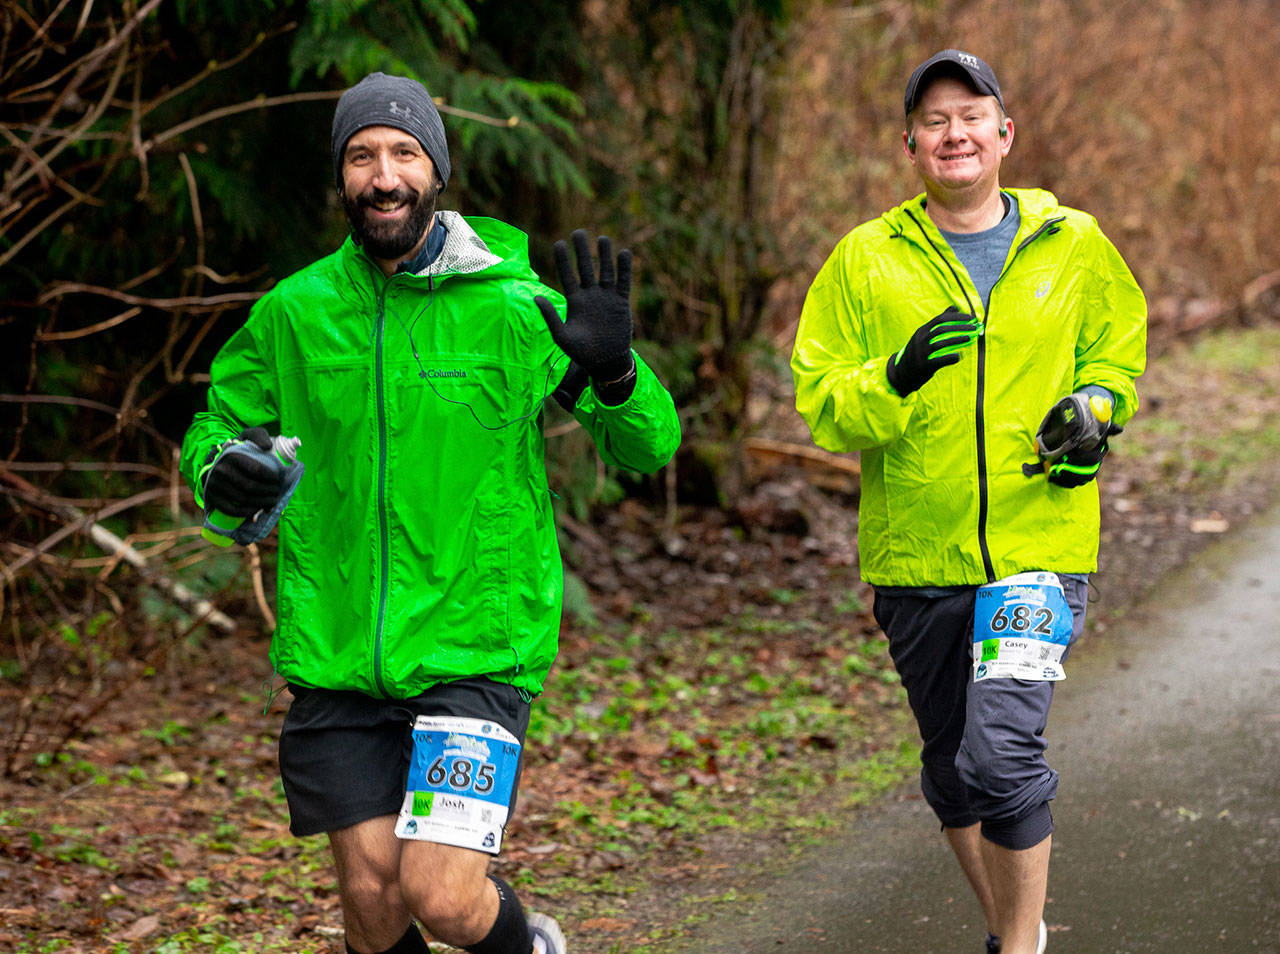 Josh Simondet of Puyallup, left, and Casey Skeen of Burien compete in the 2020 Elwha River Bridge Run. The 2021 race, set for Feb. 6, will have a number of COVID-19 precautions, including racers being encouraged to stay 6 feet apart. Submitted photo